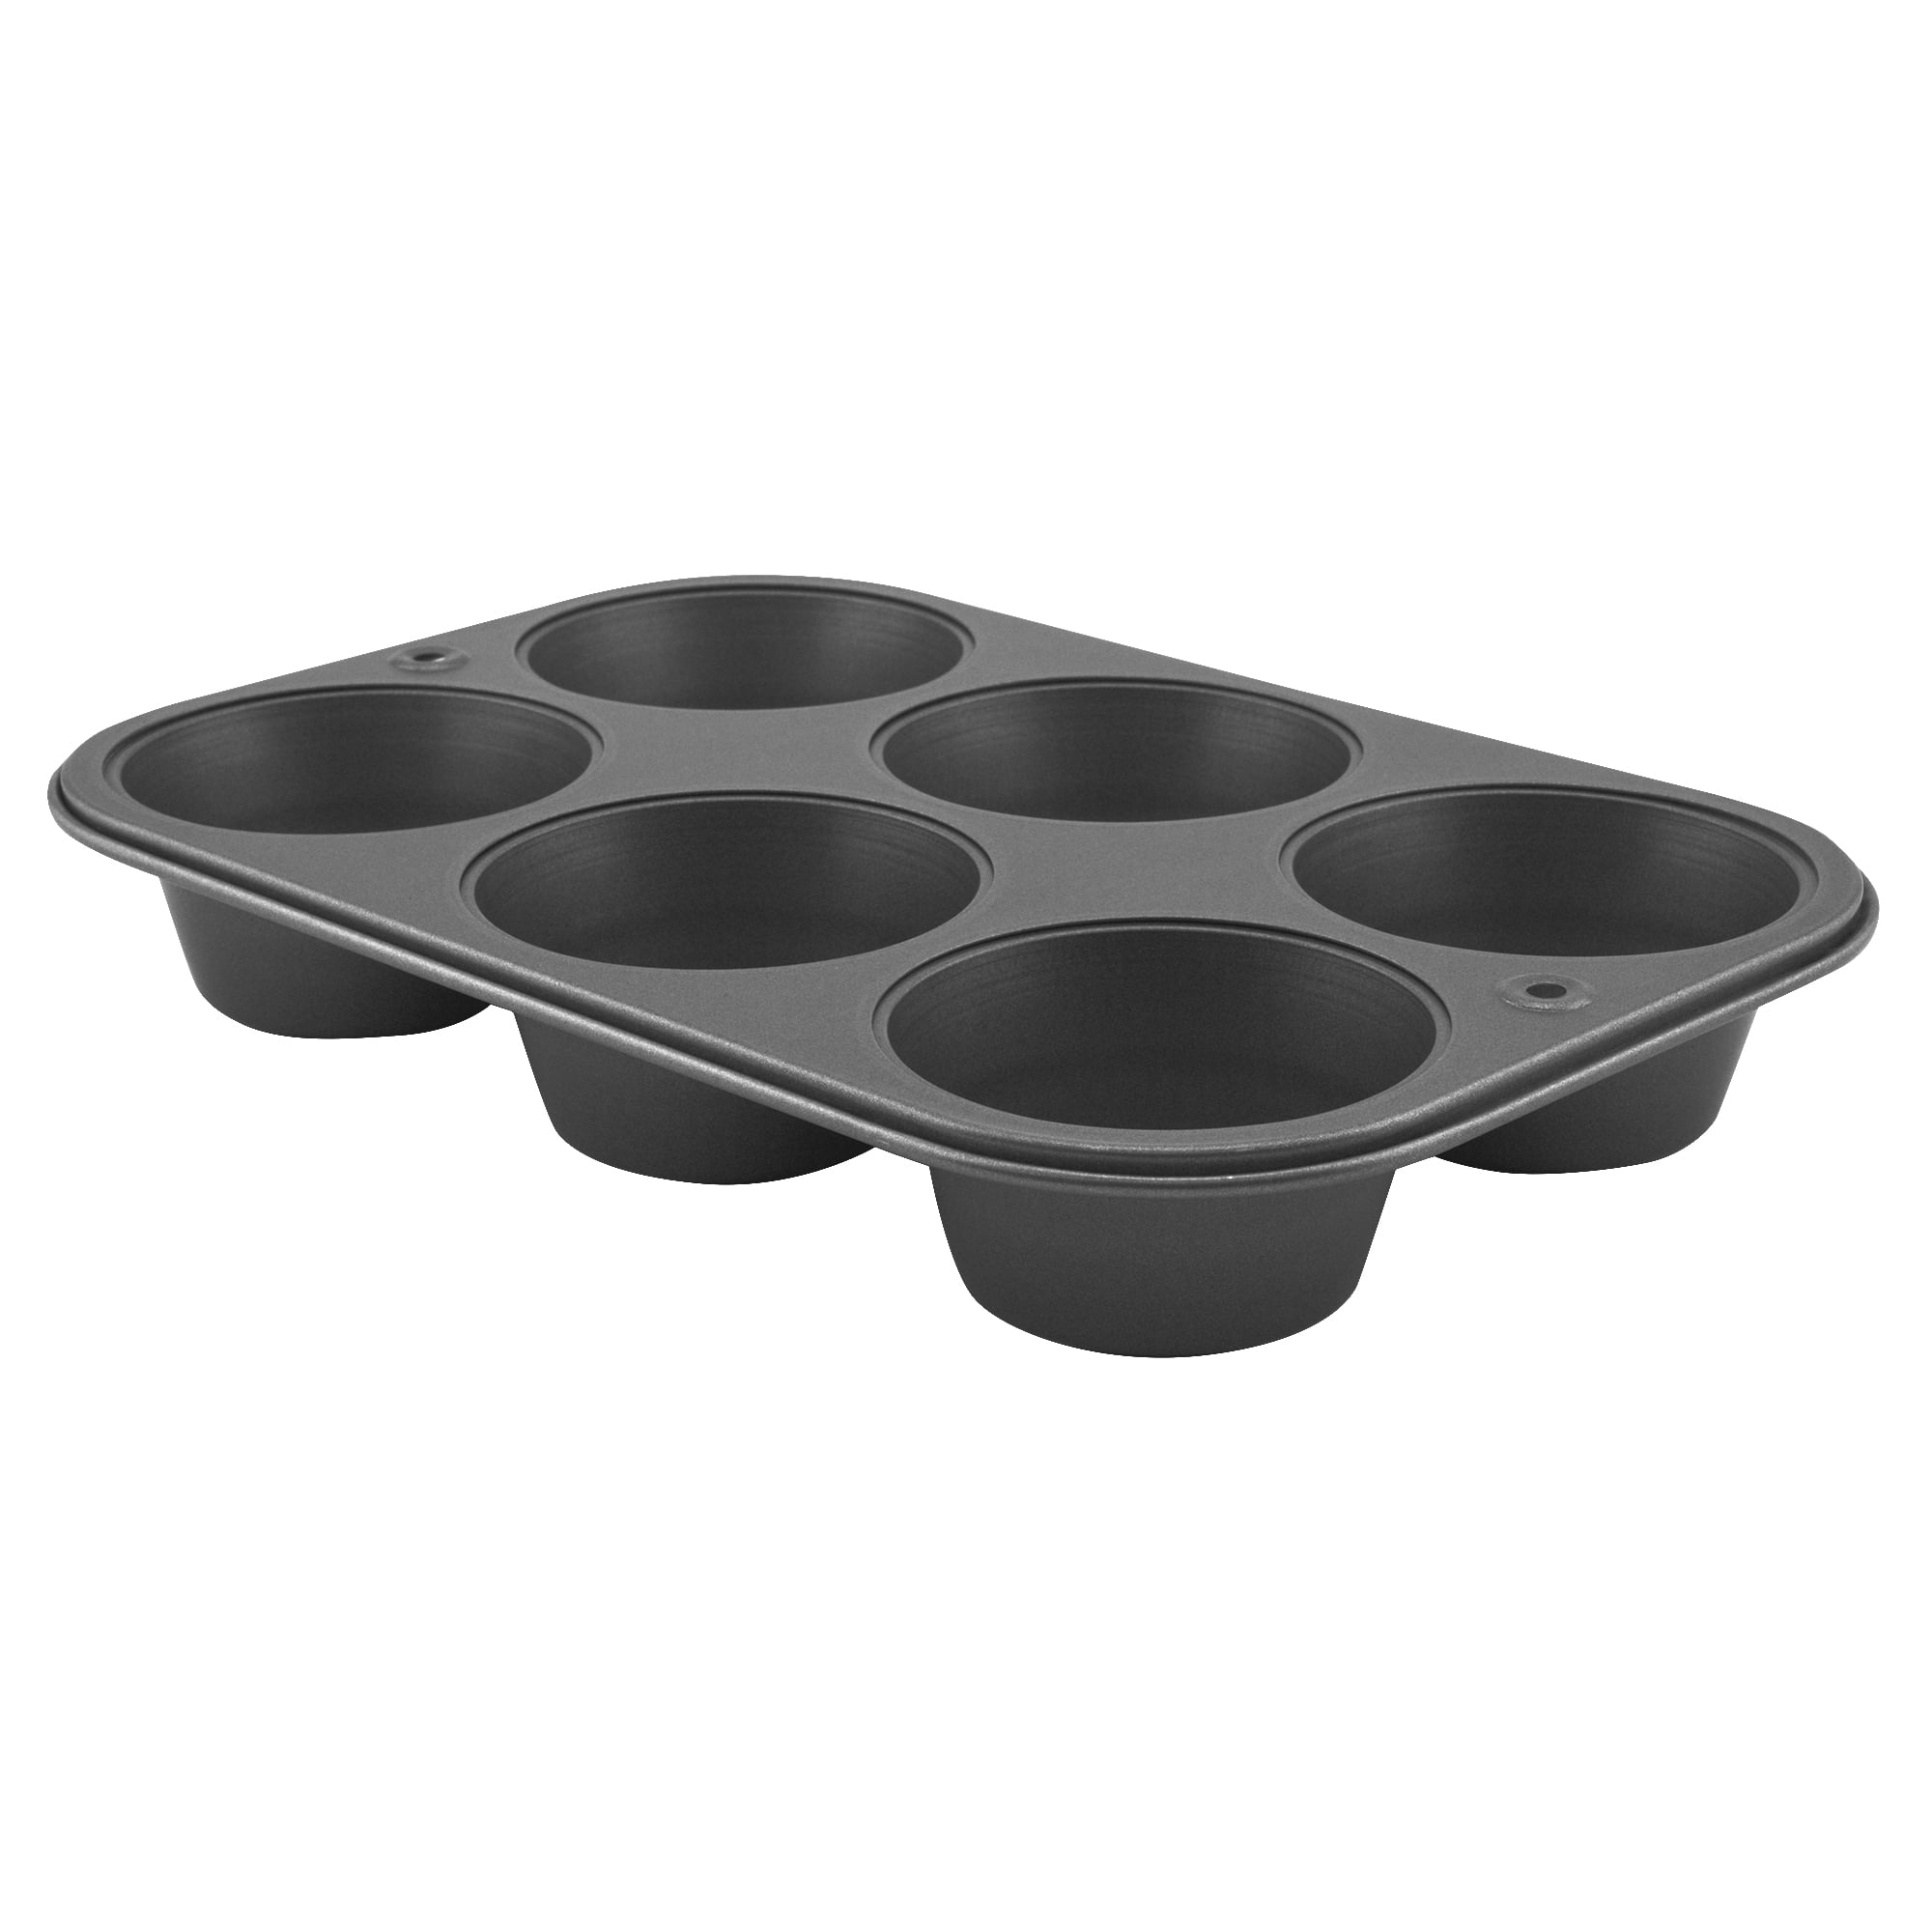 Details about   18 individual 6 cup muffin pan by smart chef 